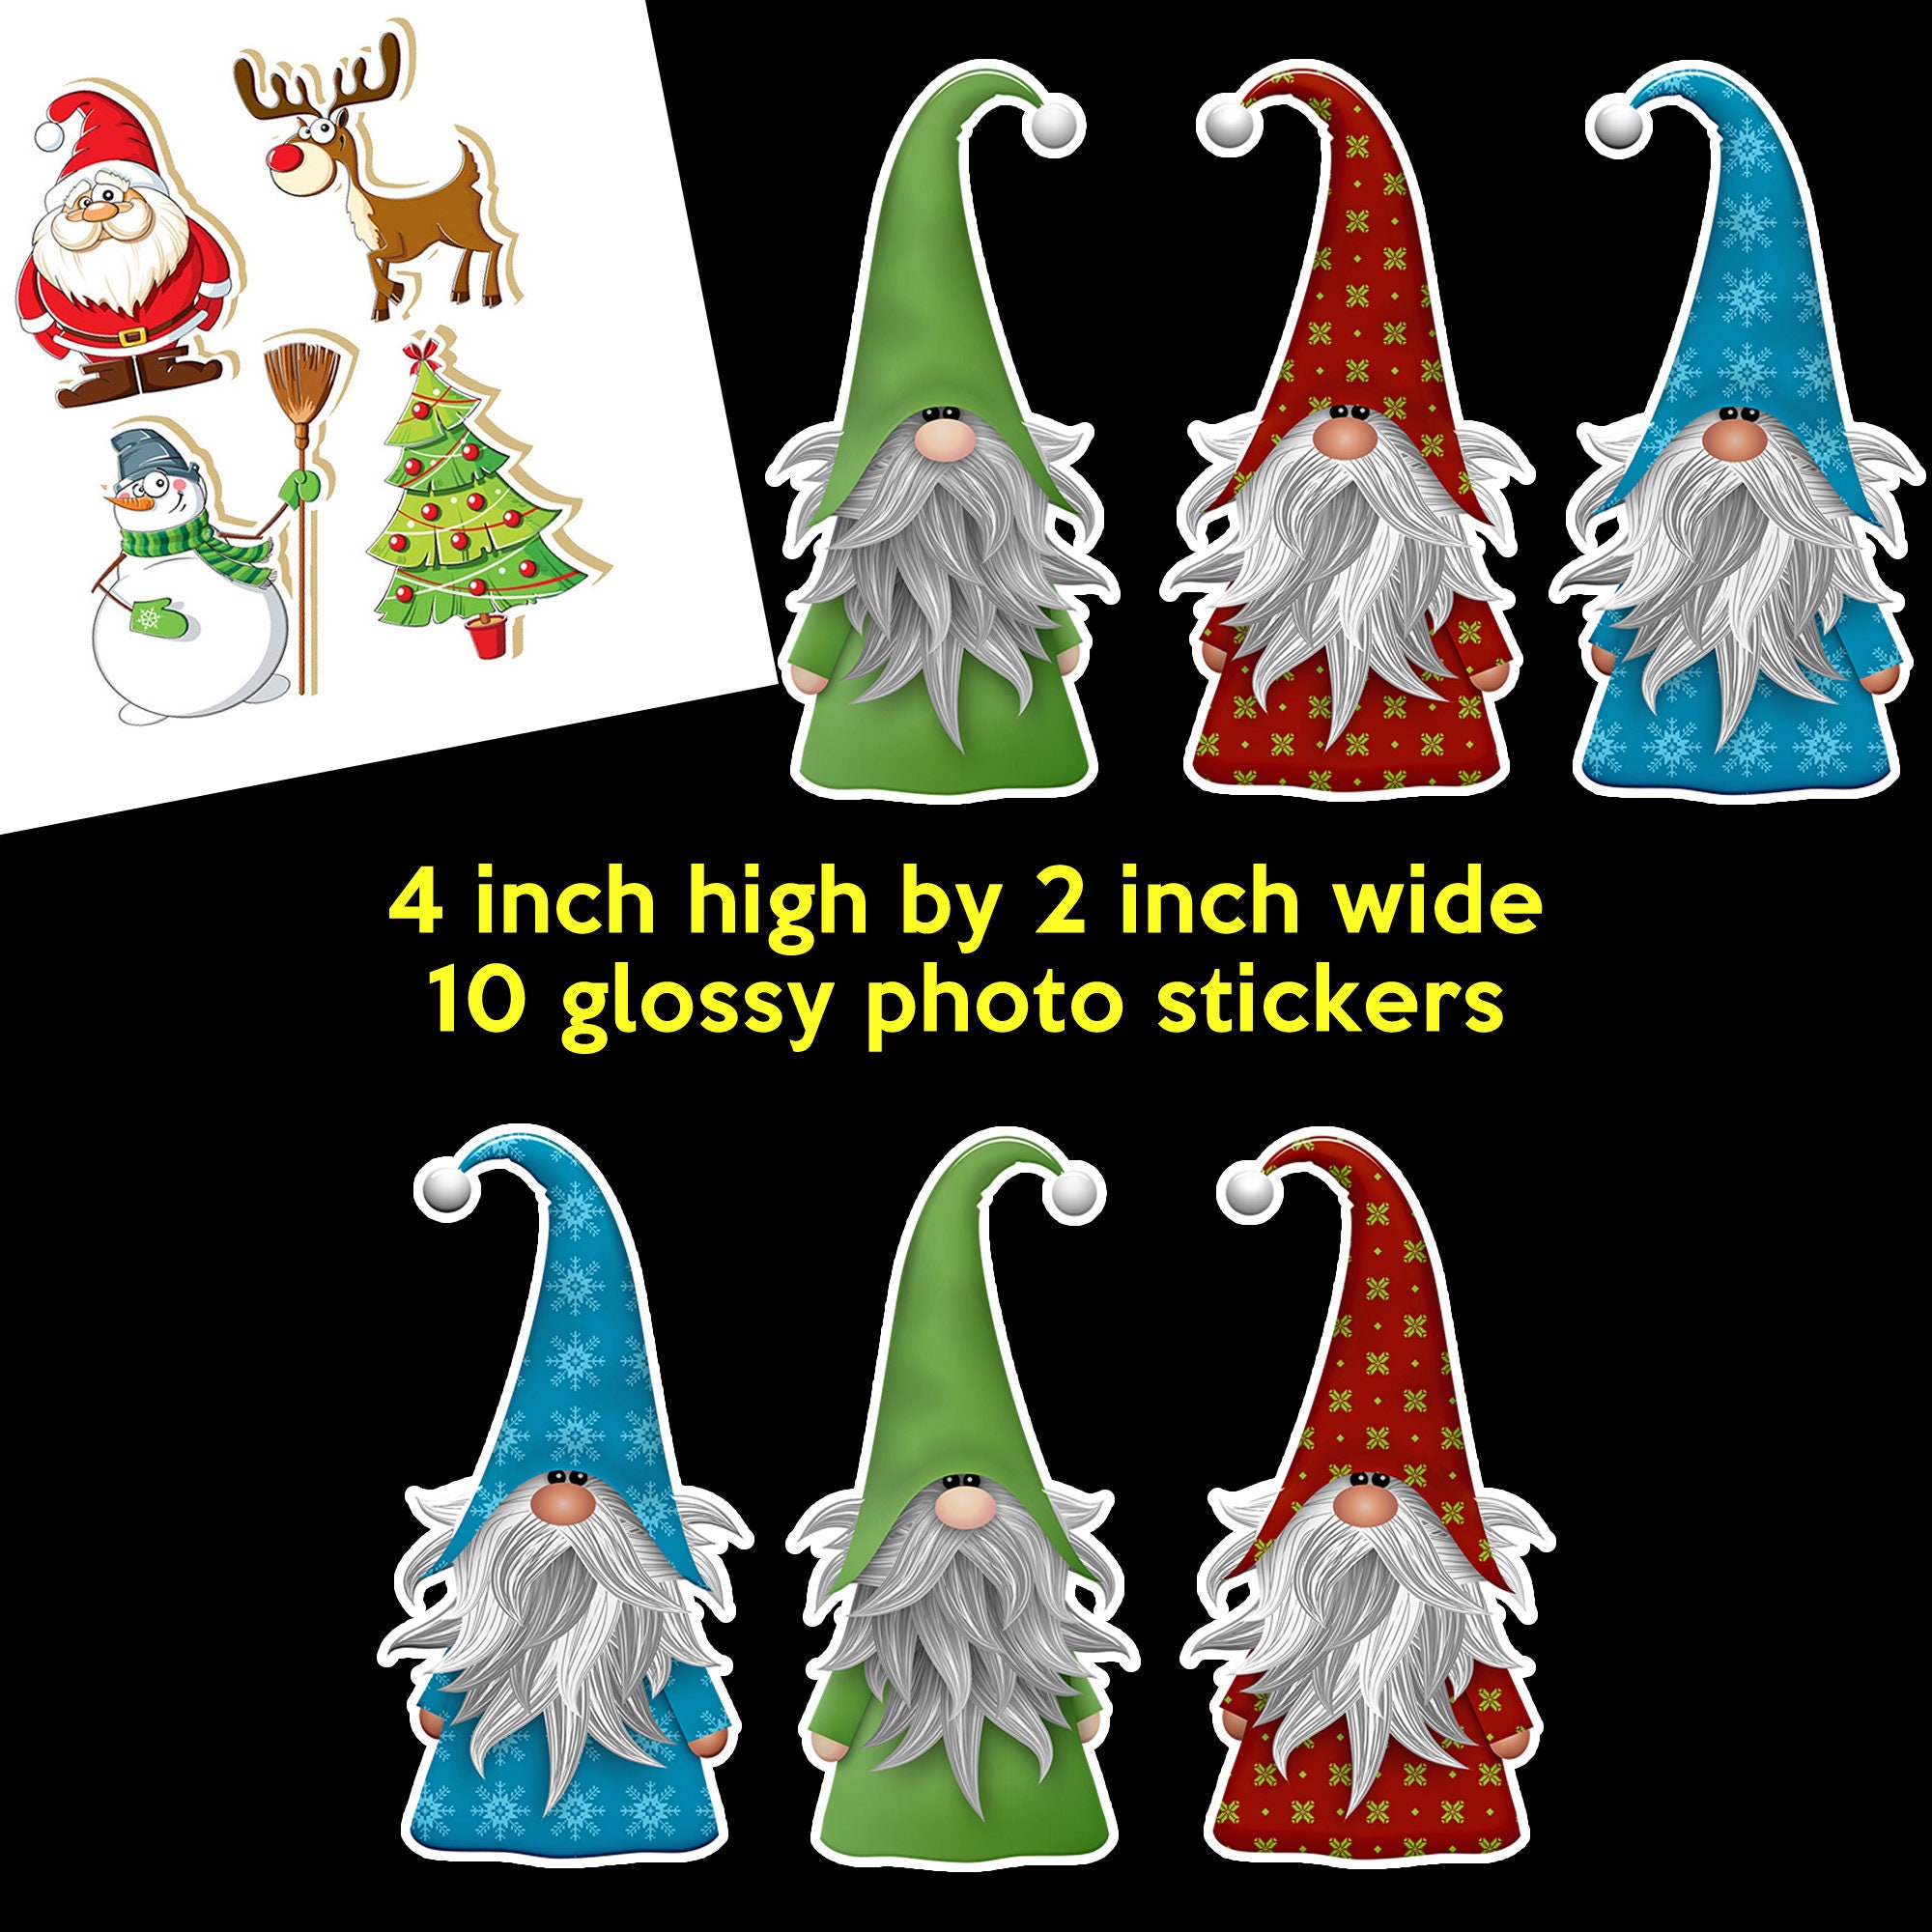 10 large christmas stickers 4 inches high by 2 inches wide - glossy vivid christmas stickers